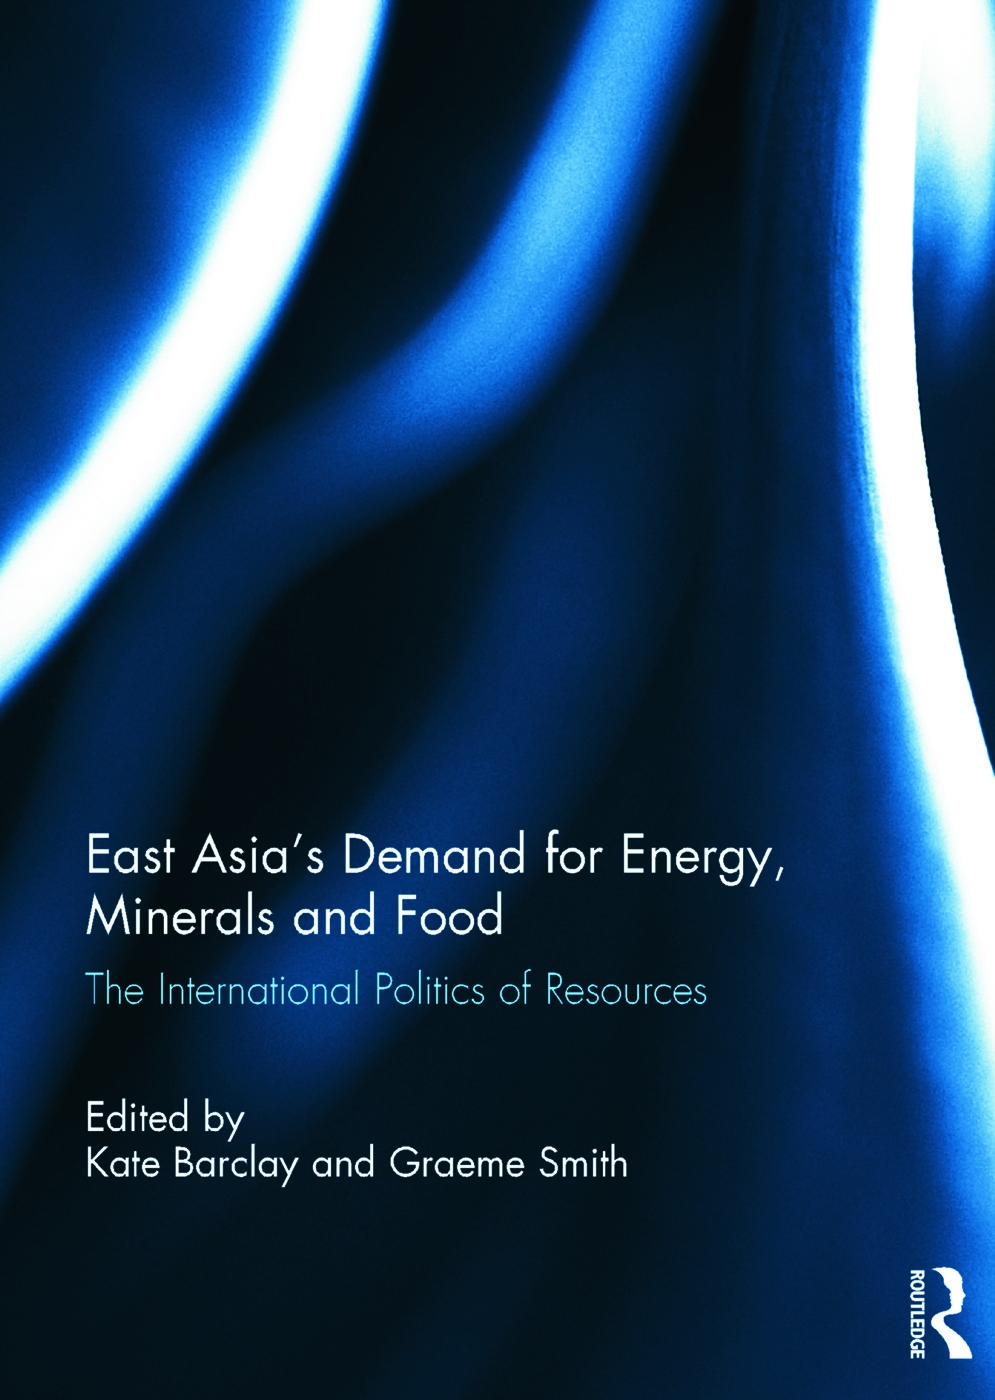 East Asia’s Demand for Energy, Minerals and Food: The International Politics of Resources